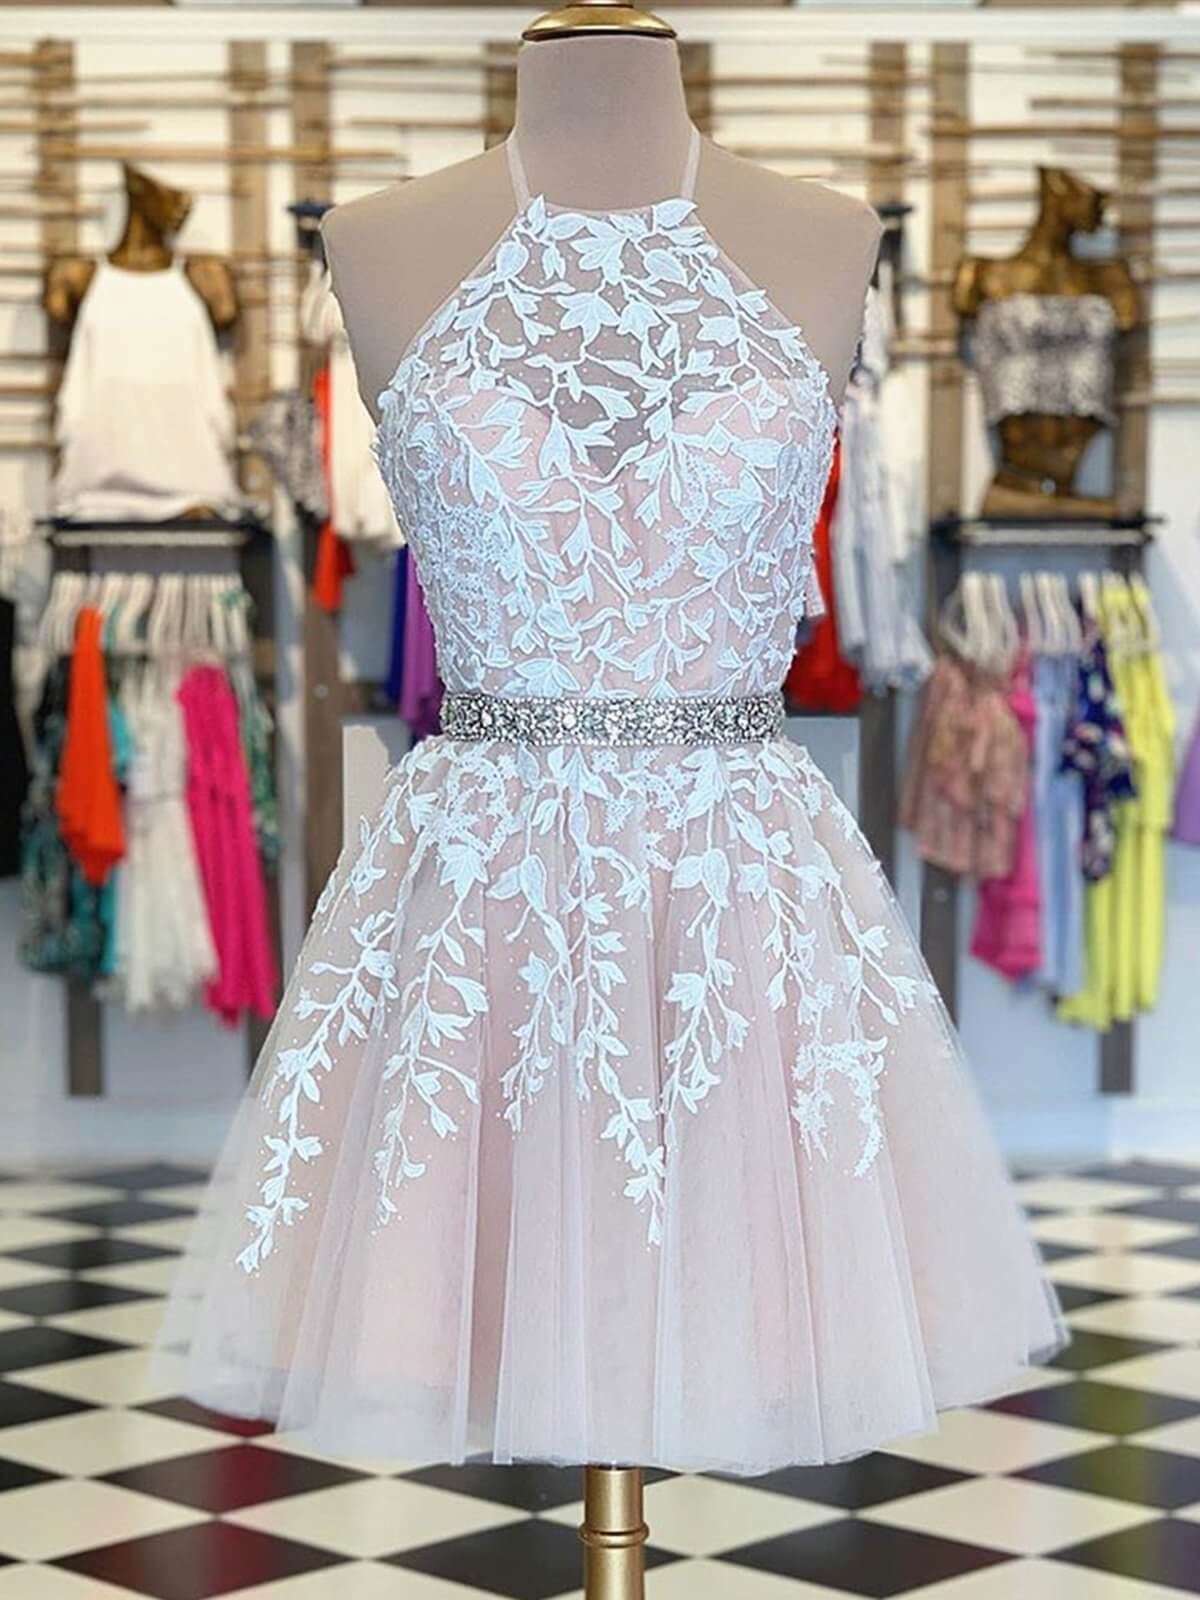 Party Dresses Store, A Line Halter Neck Short Champagne Lace Prom Dresses,Lace Formal Homecoming Dress